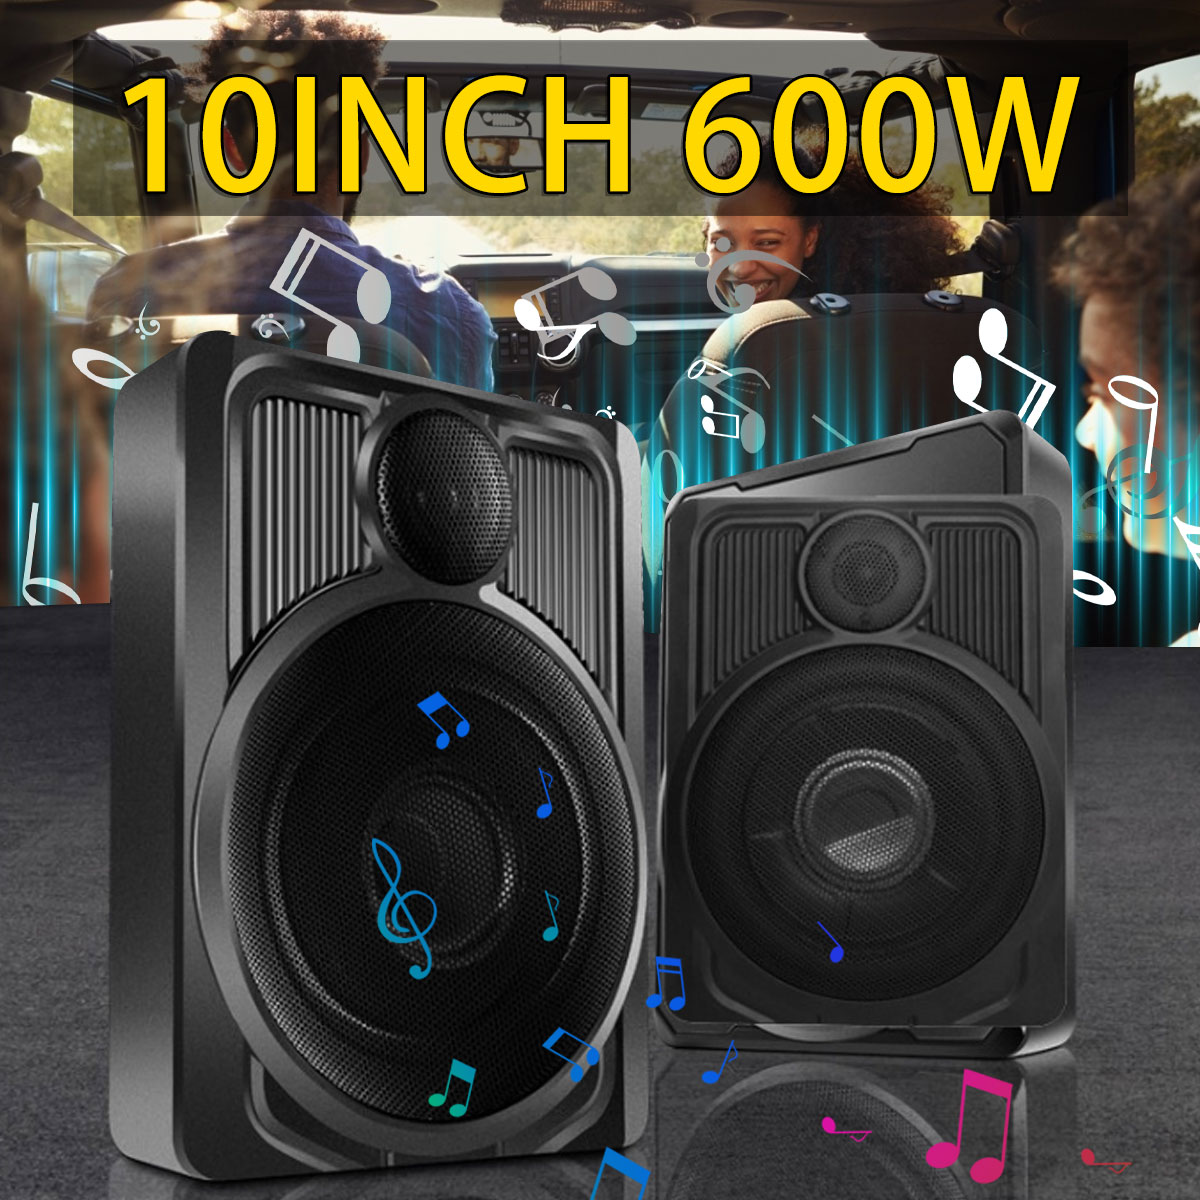 Bakeey-600W-Subwoofer-12V-Car-Ultra-thin-10-inch-With-Tweeter-Subwoofer-Dedicated-Full-range-Subwoof-1746877-3